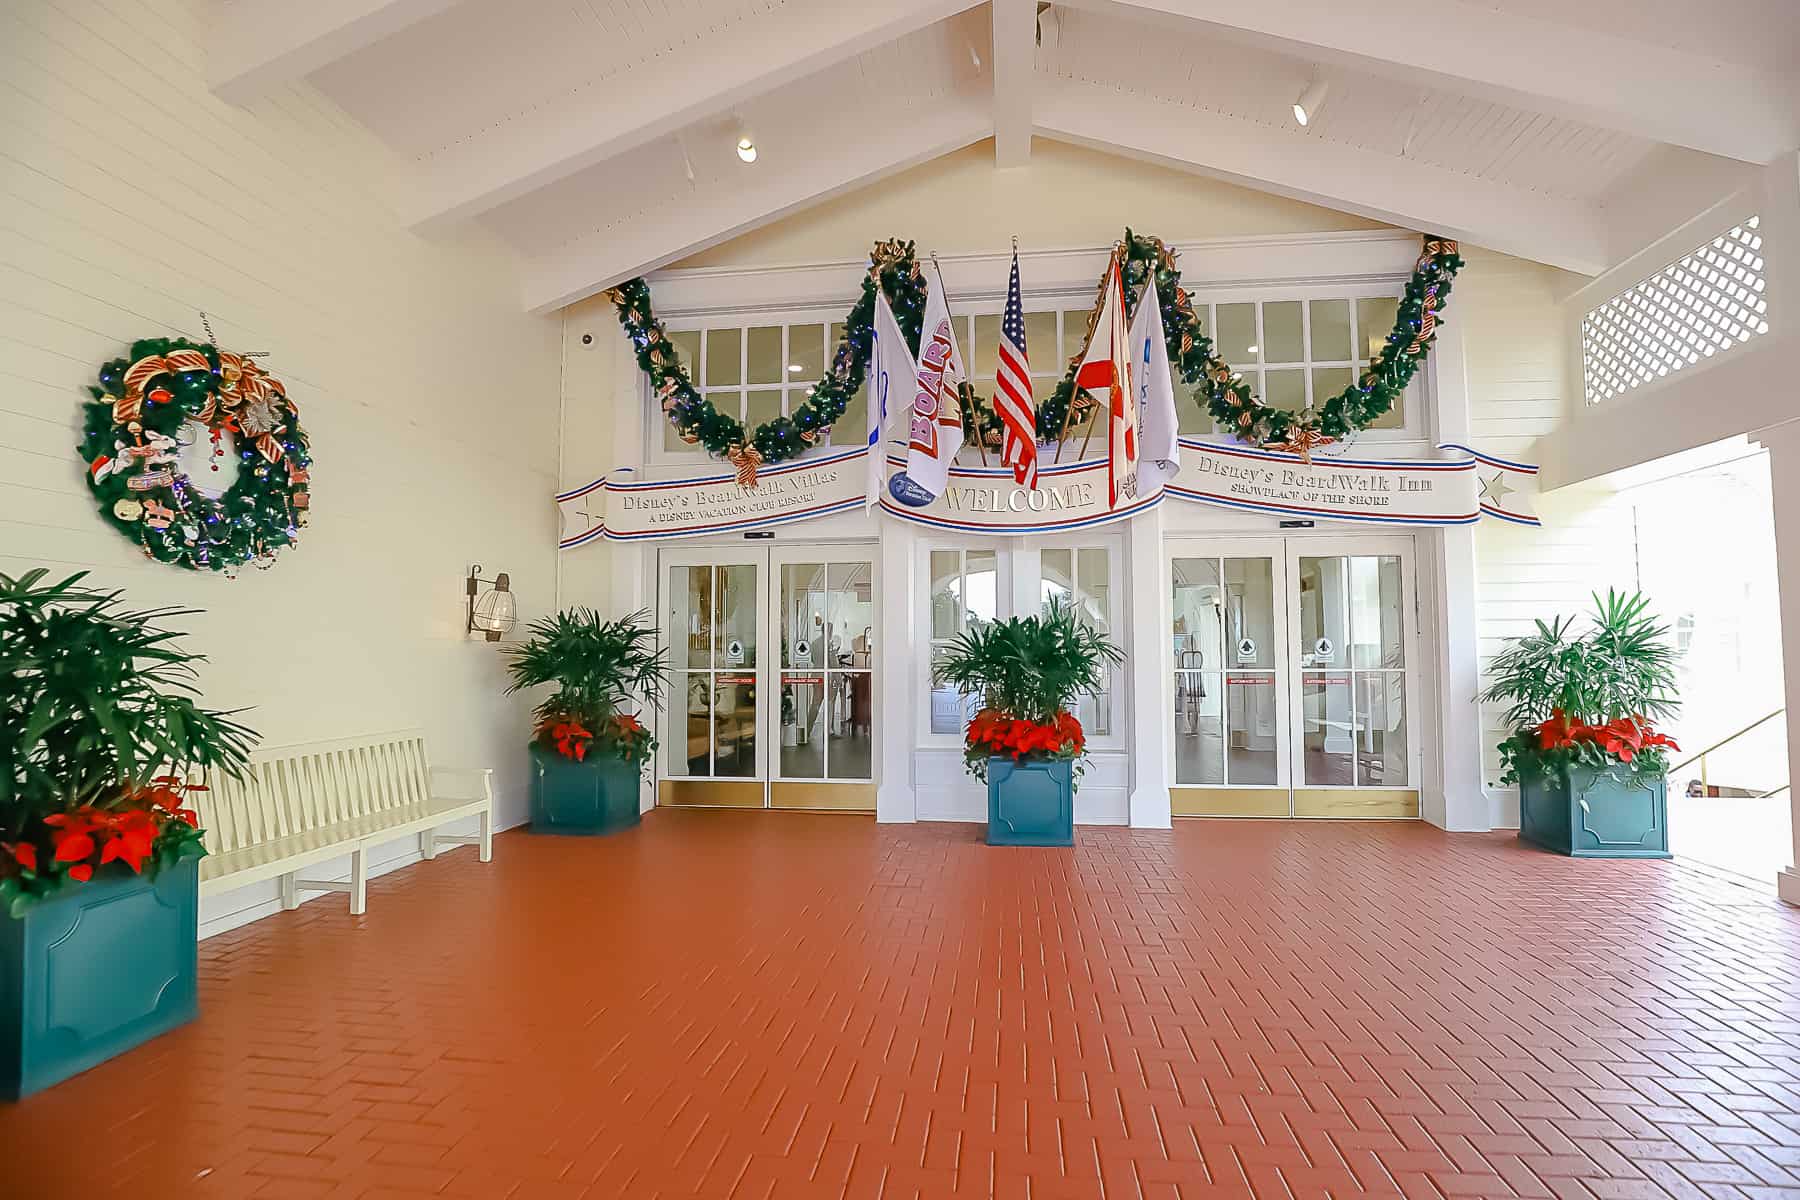 exterior entrance to Disney's Boardwalk Inn dressed in holiday trimmings 